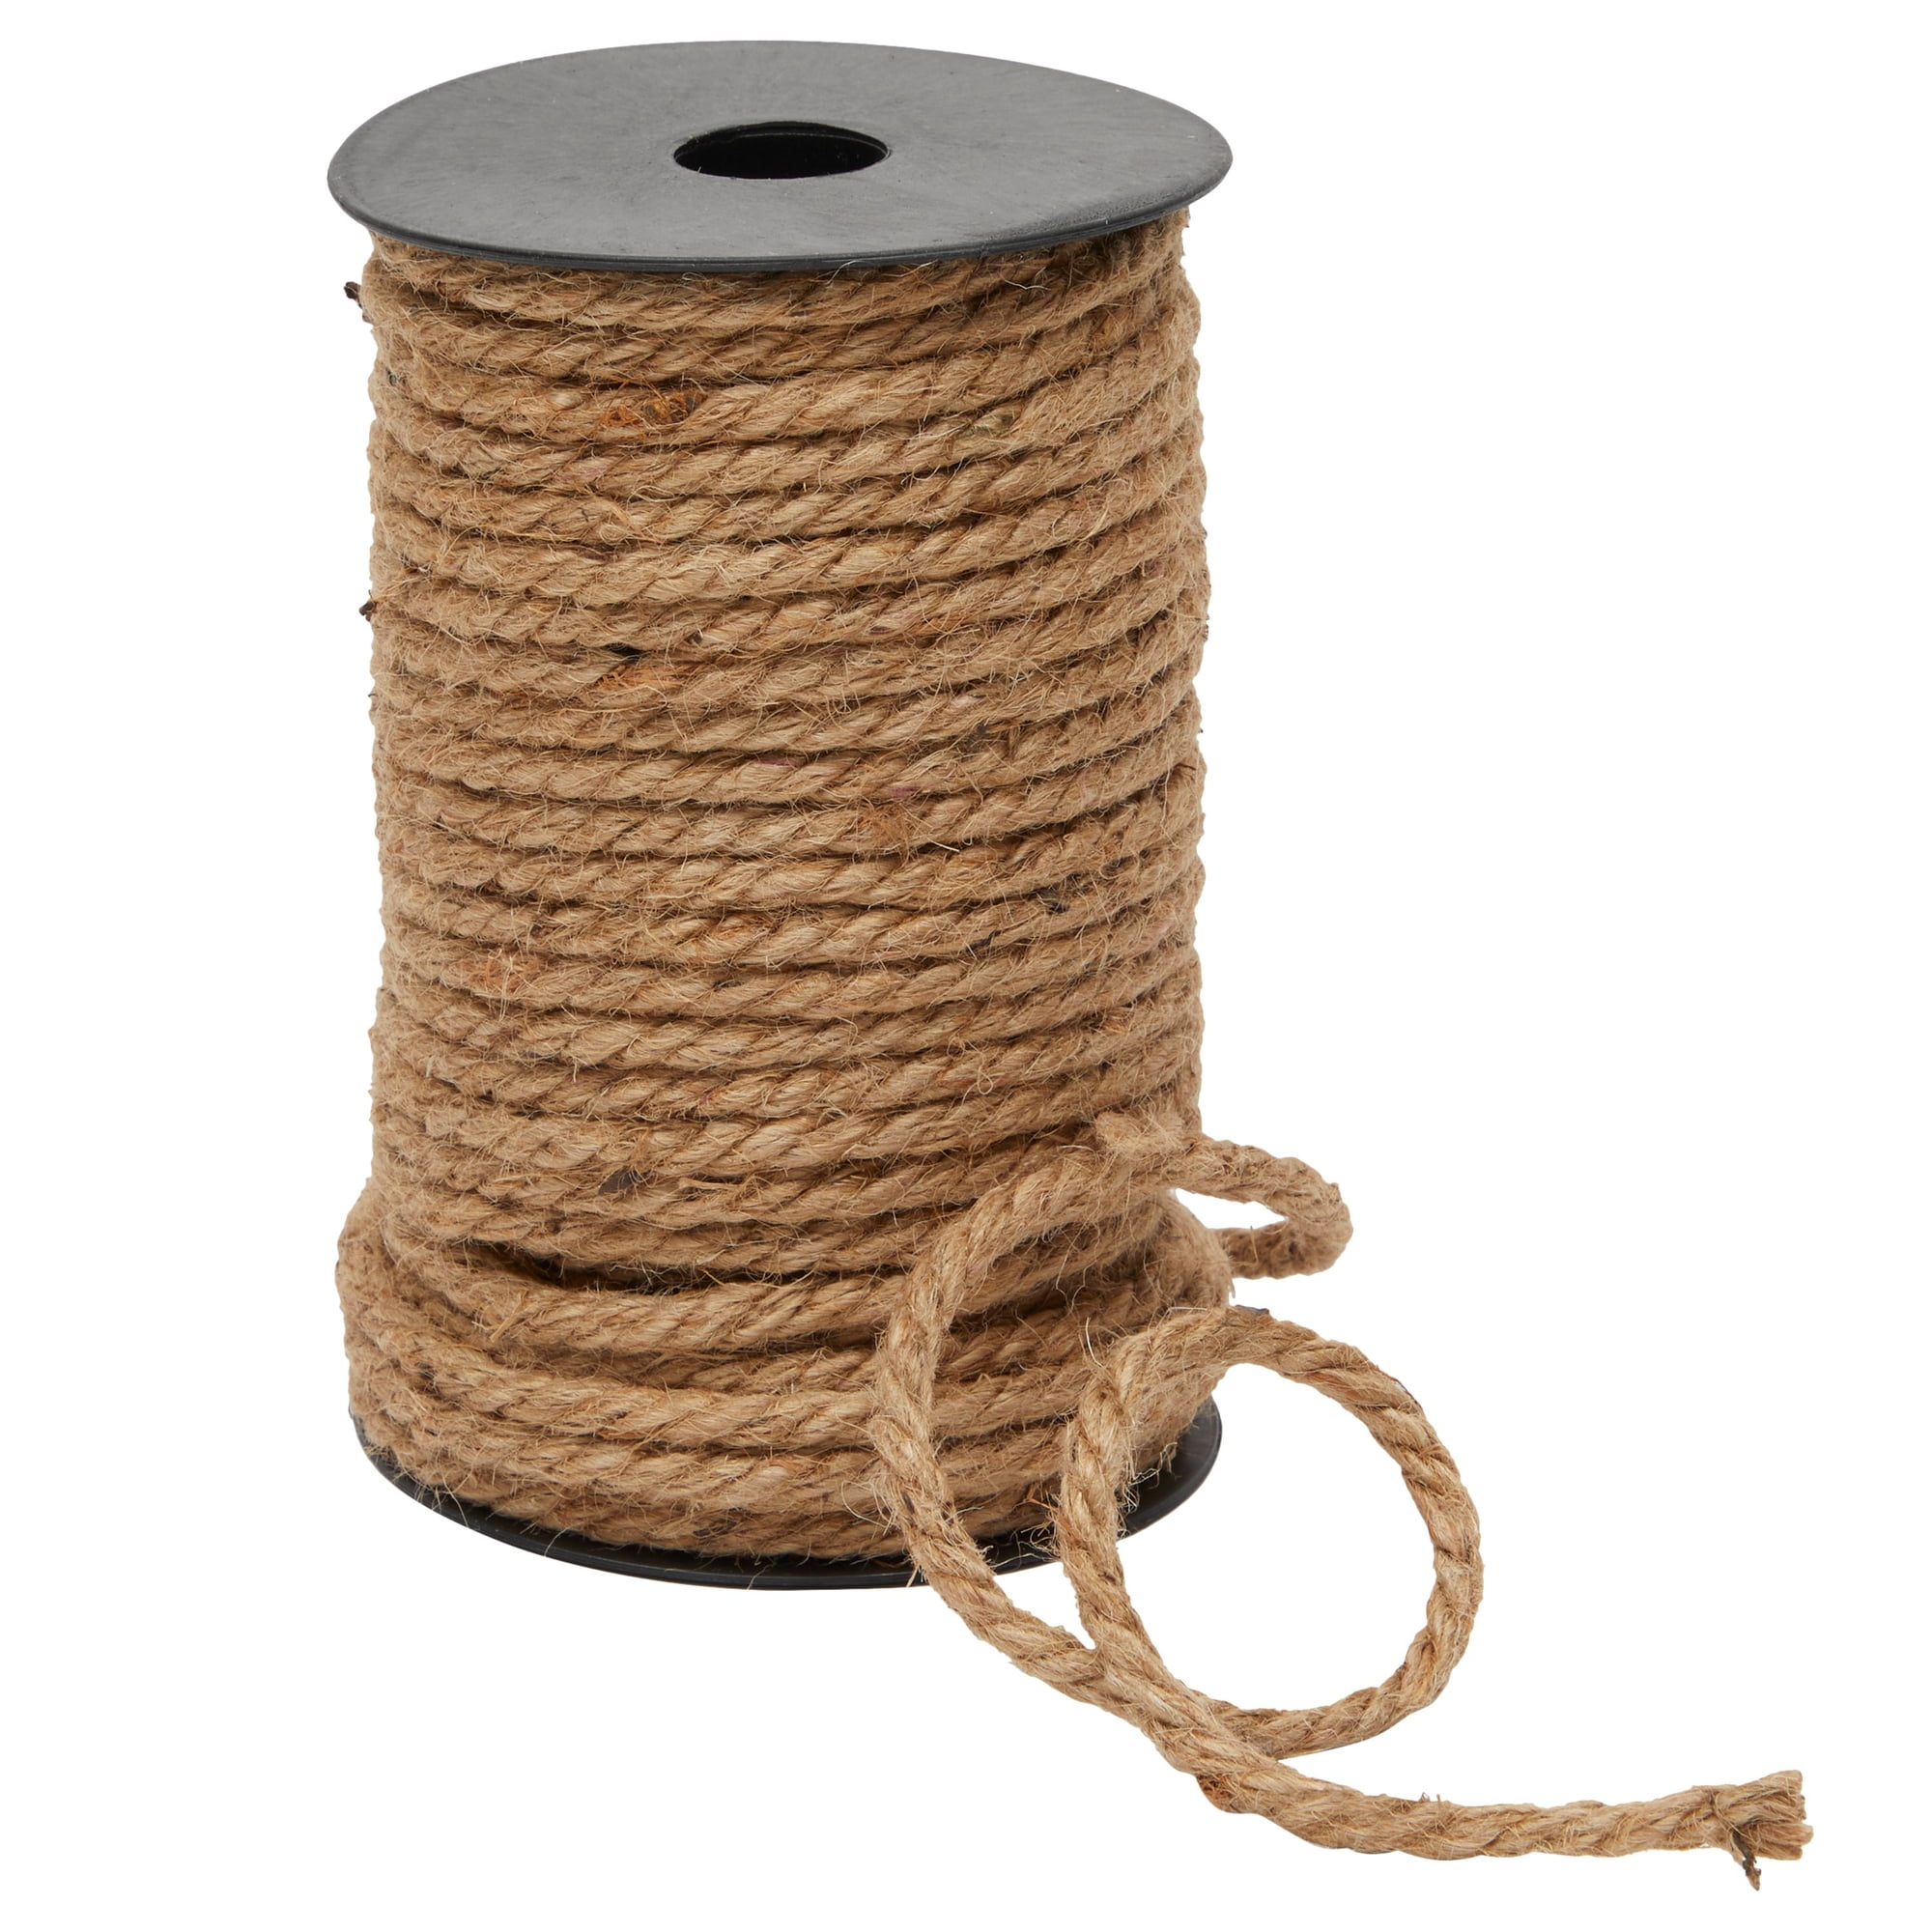 5mtr Moss Green 100% Jute Craft Twine, 2mm (1/16in) Thick *Sold Per 5mtr*